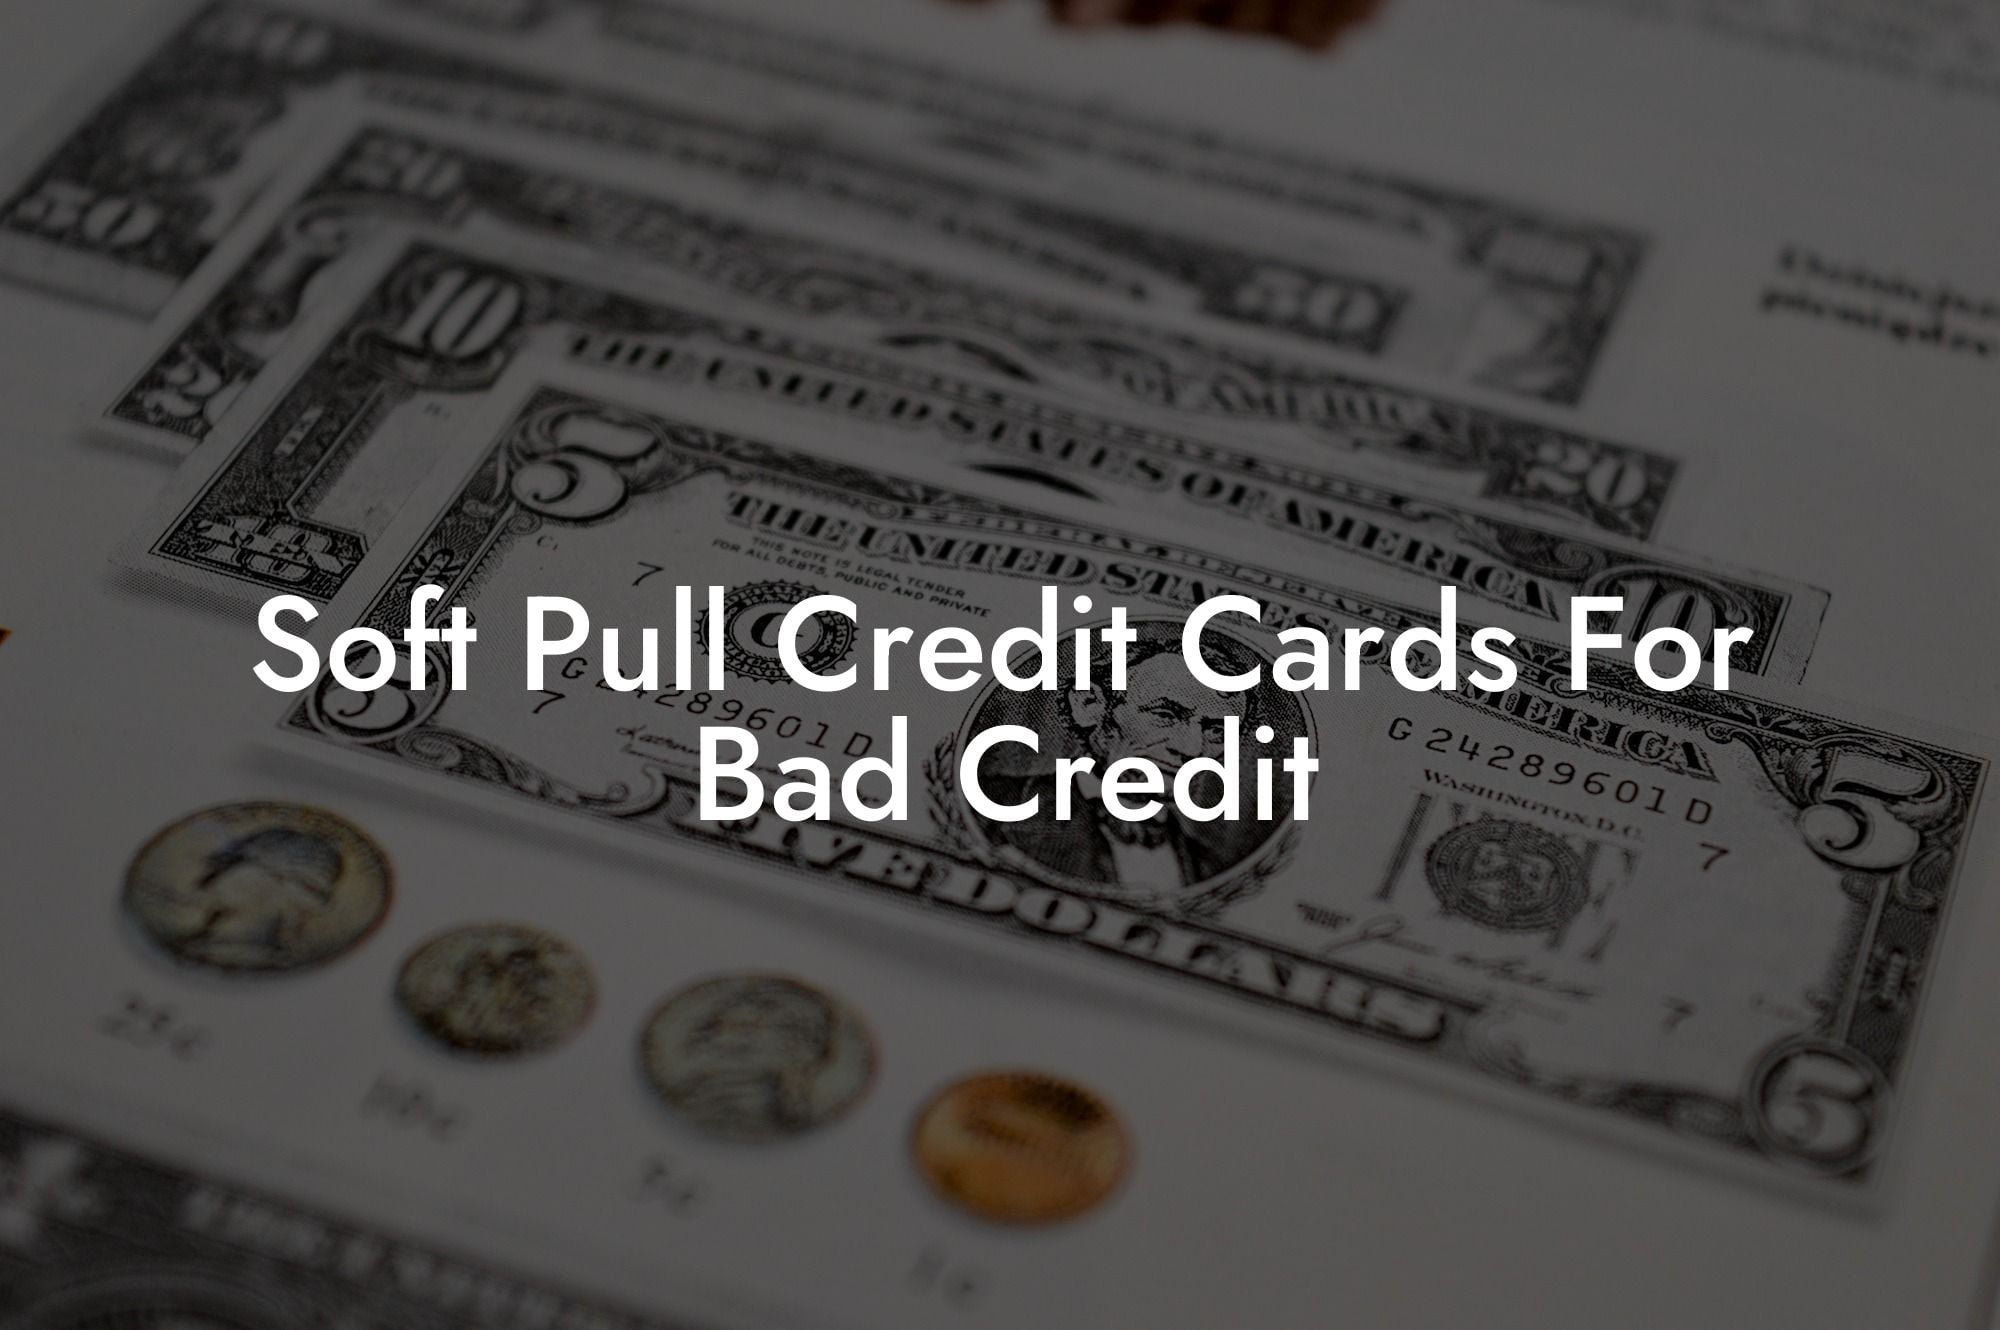 Soft Pull Credit Cards For Bad Credit